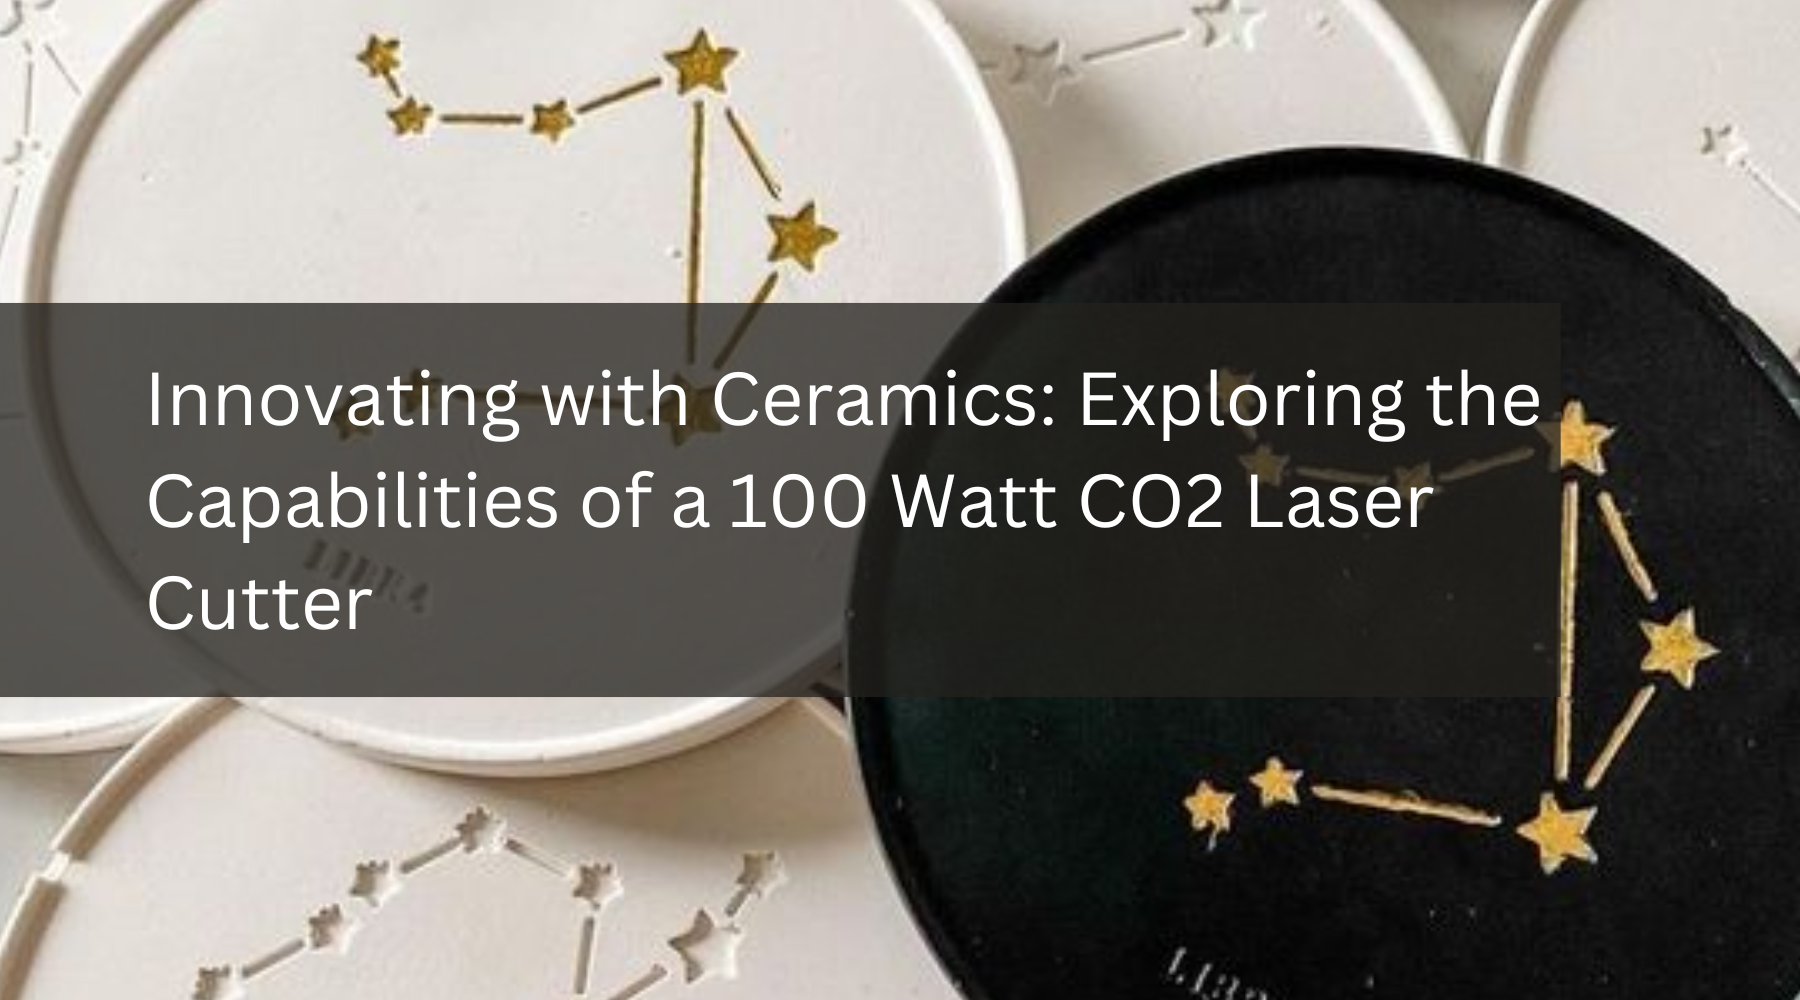 Innovating with Ceramics: Exploring the Capabilities of a 100 Watt CO2 Laser Cutter